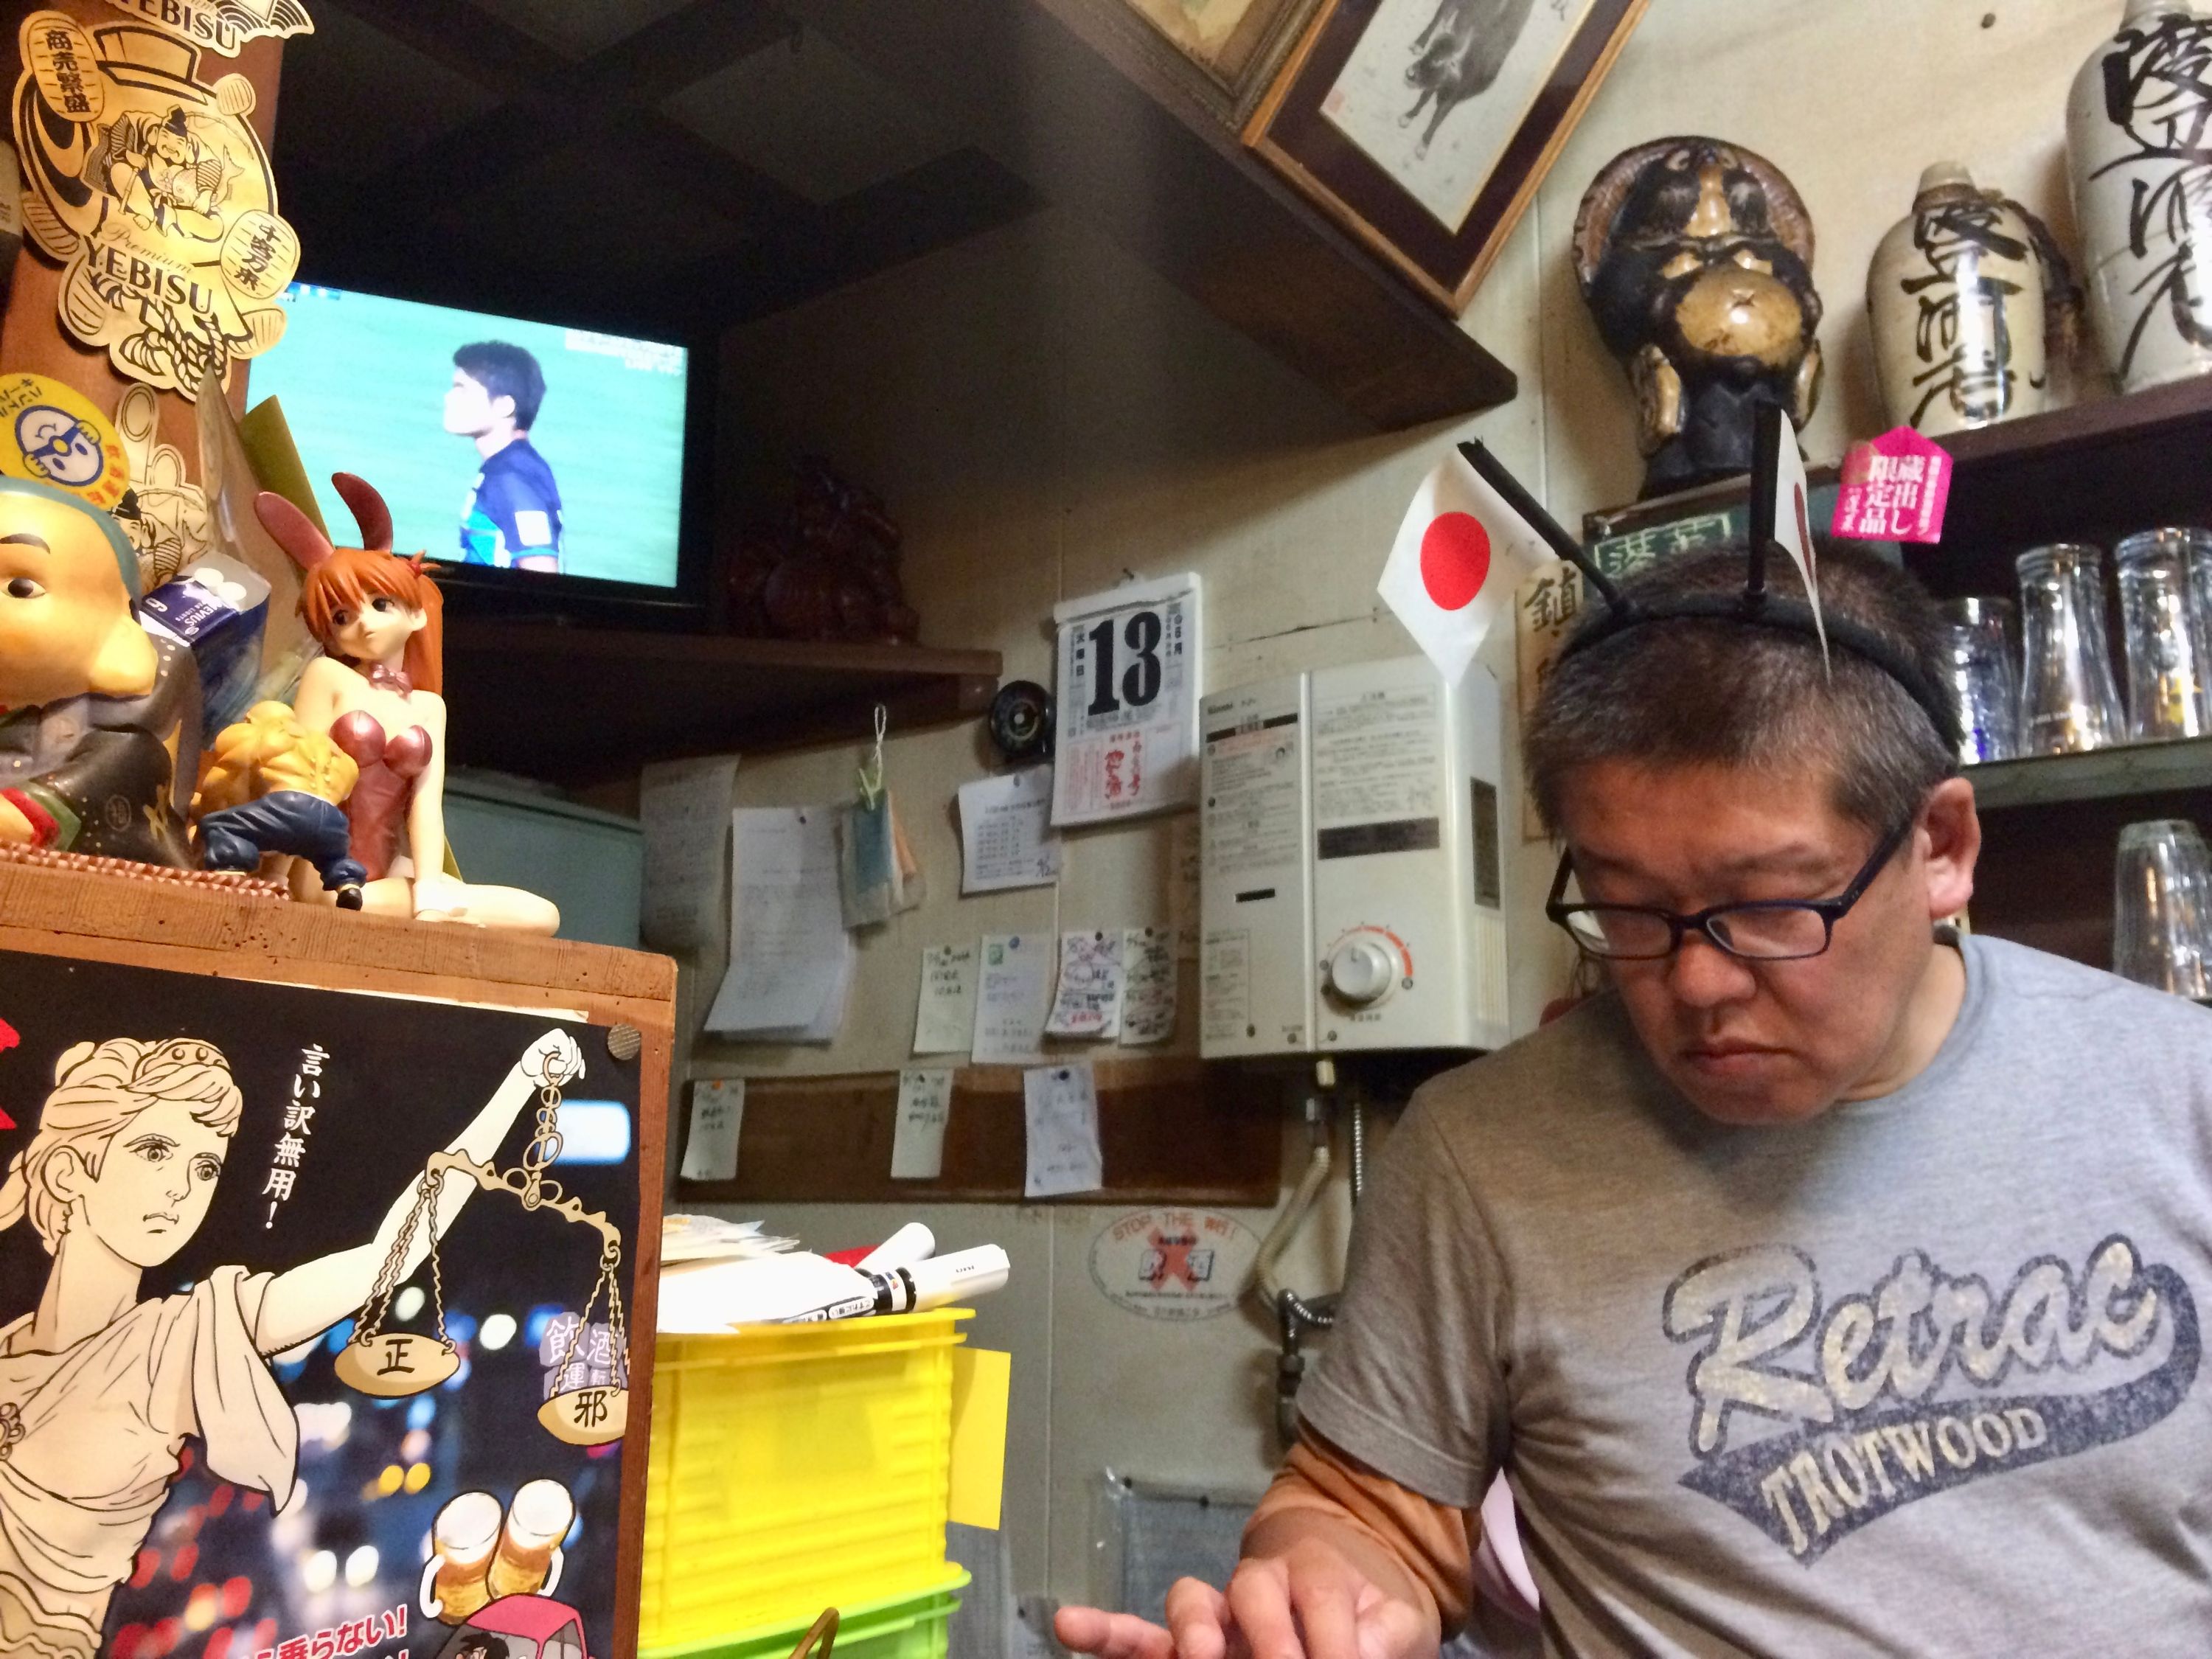 A bartender with two Japanese flags attached to his headband prepares food in a bar.